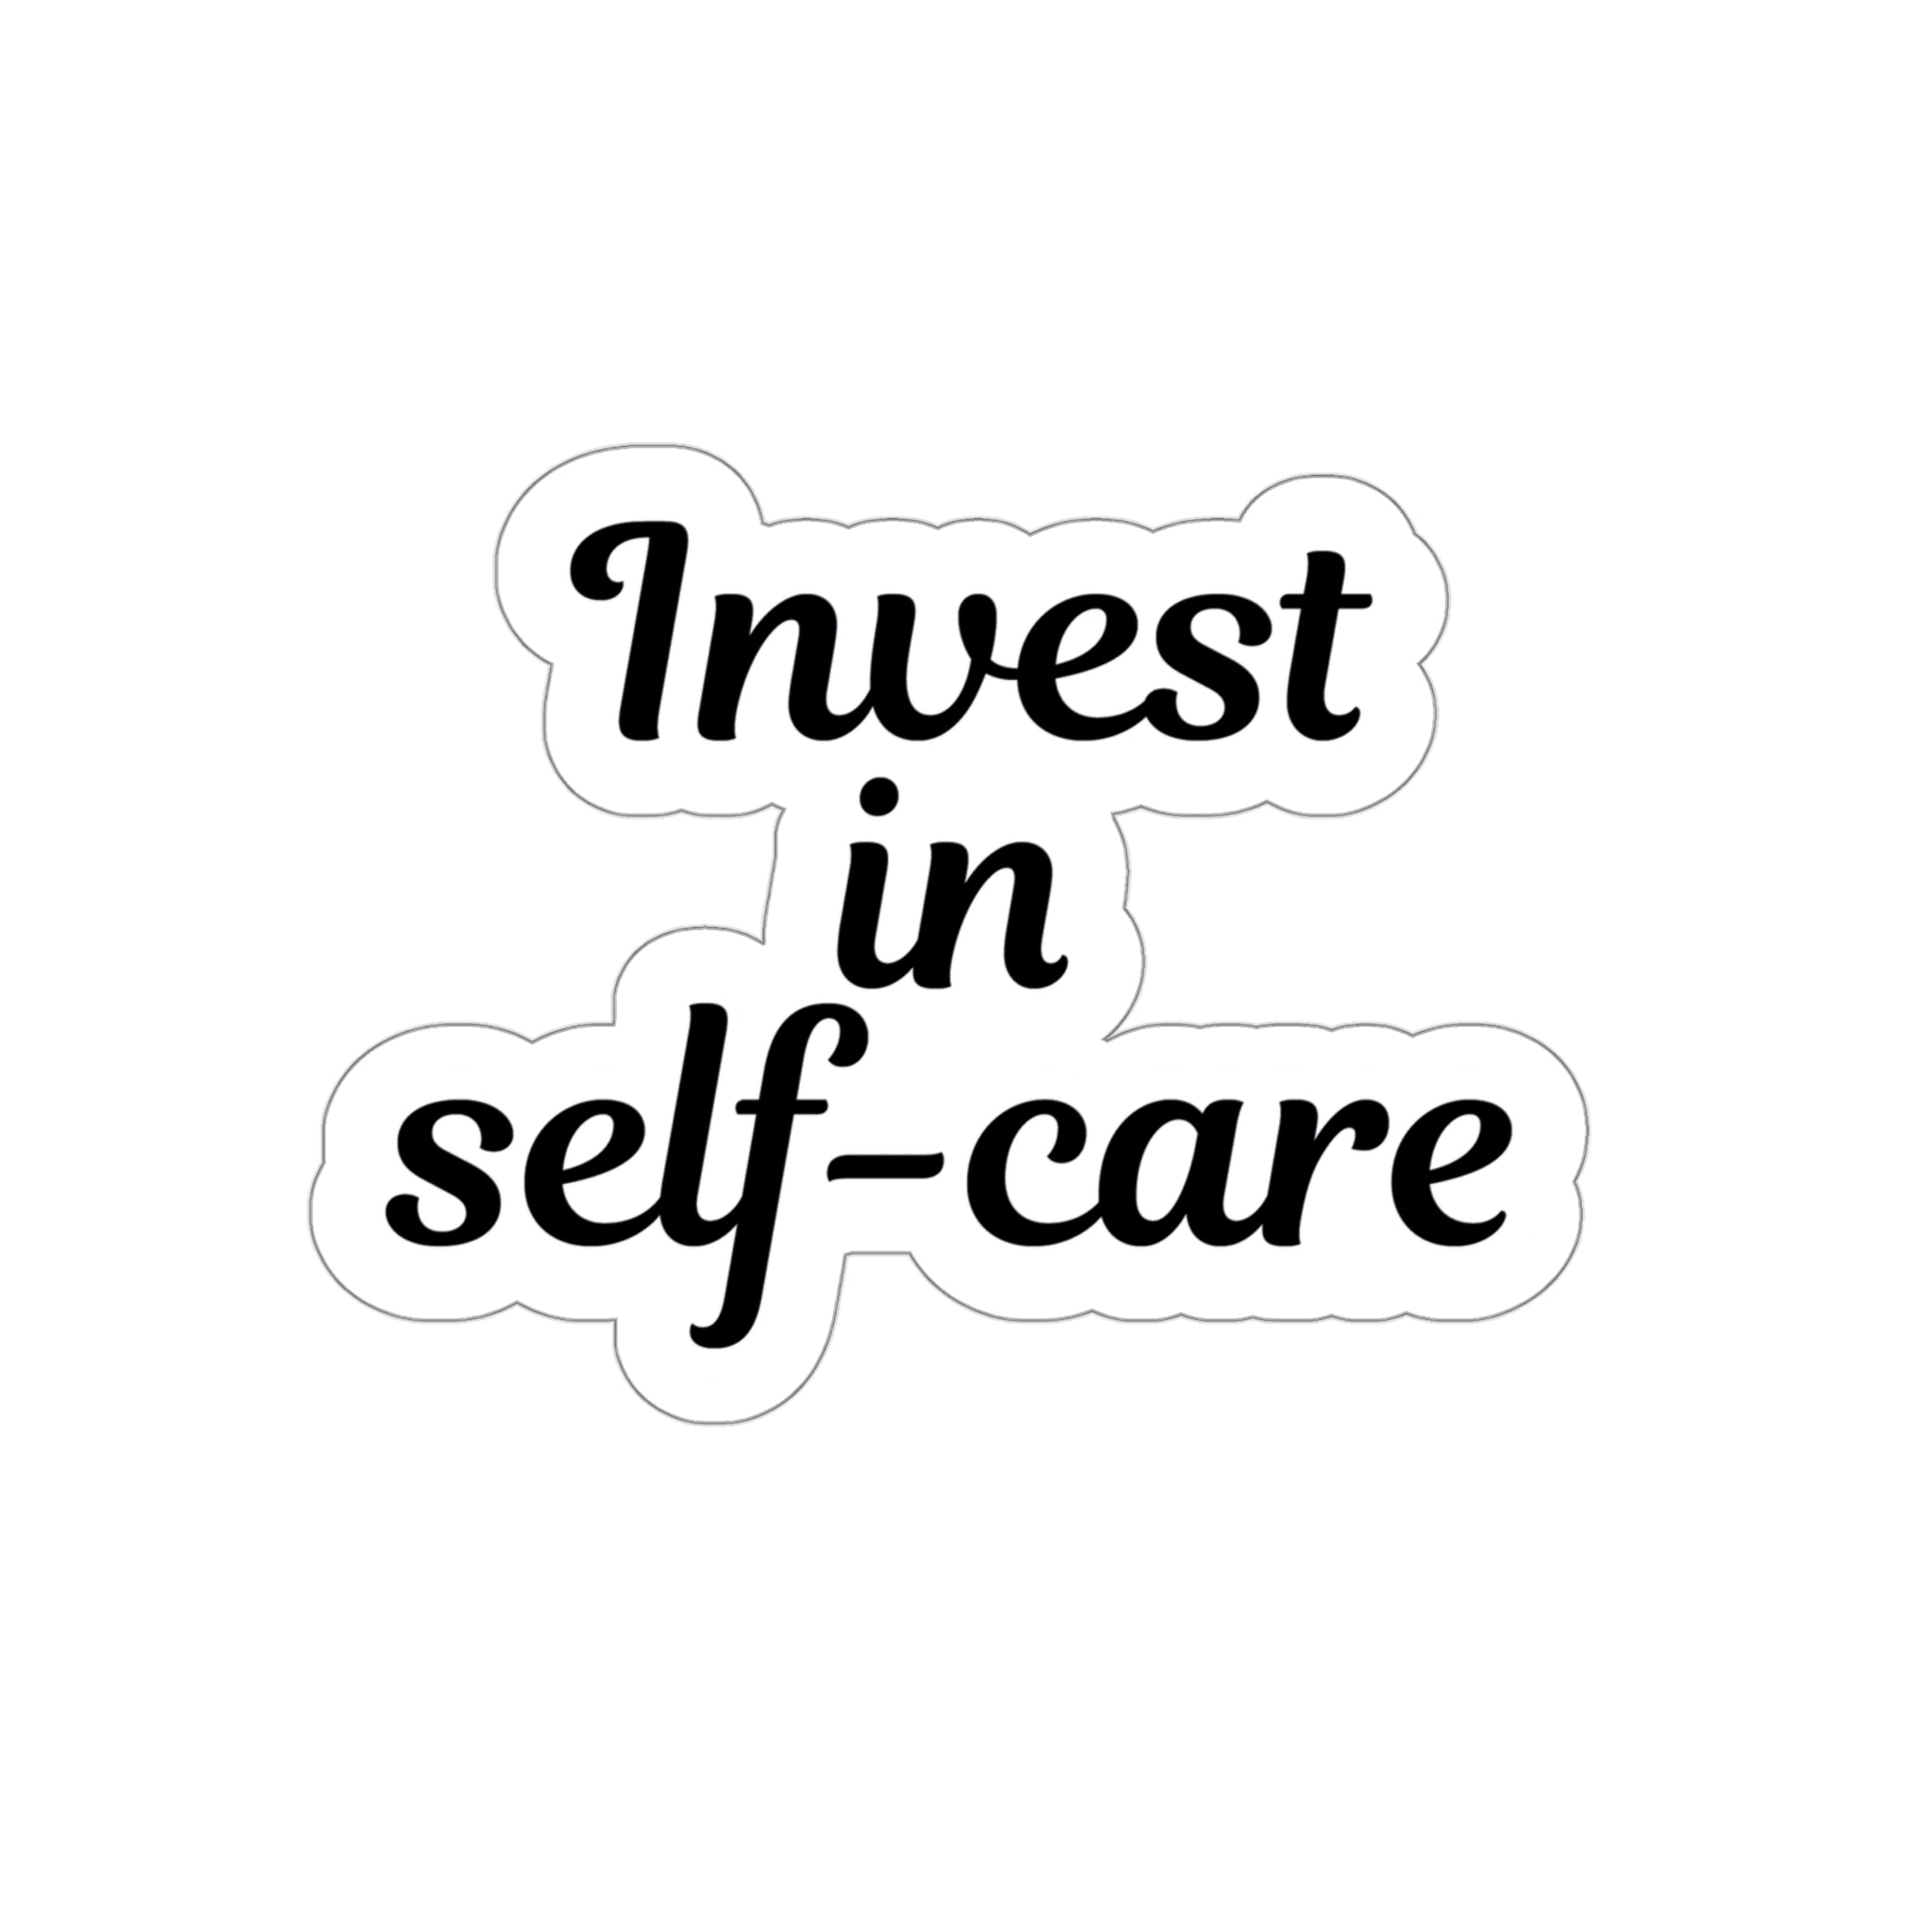 Invest in self-care sticker | Shop short self-care quotes #size_4x4-inches